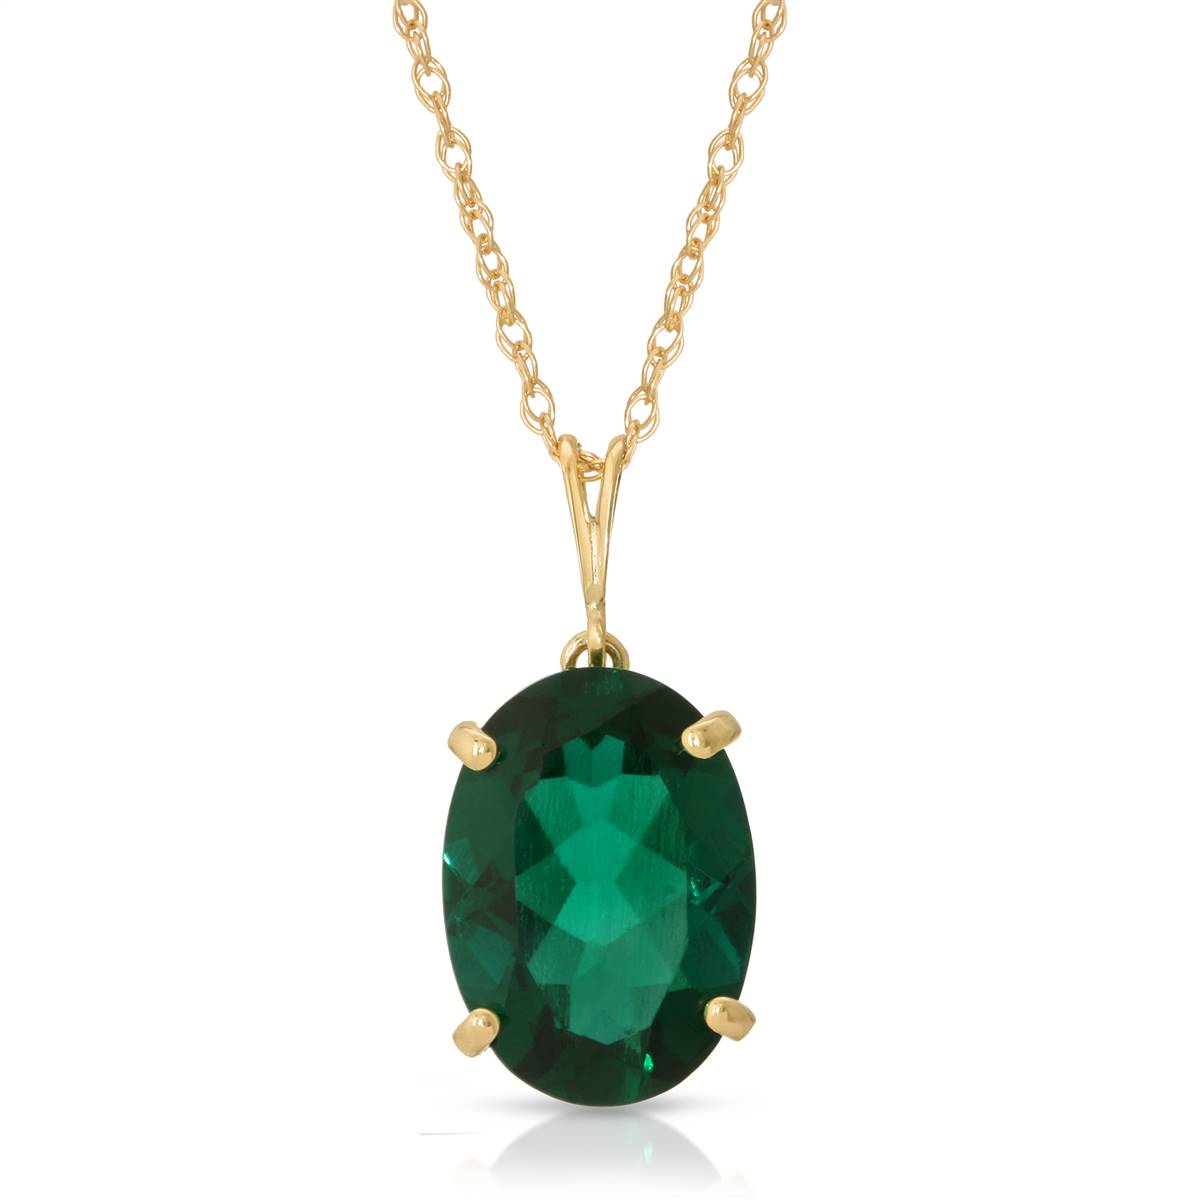 14K Solid Yellow Gold Necklace With Oval Shape 4.5 ctw High Polished Genuine Emerald - Grade AAA